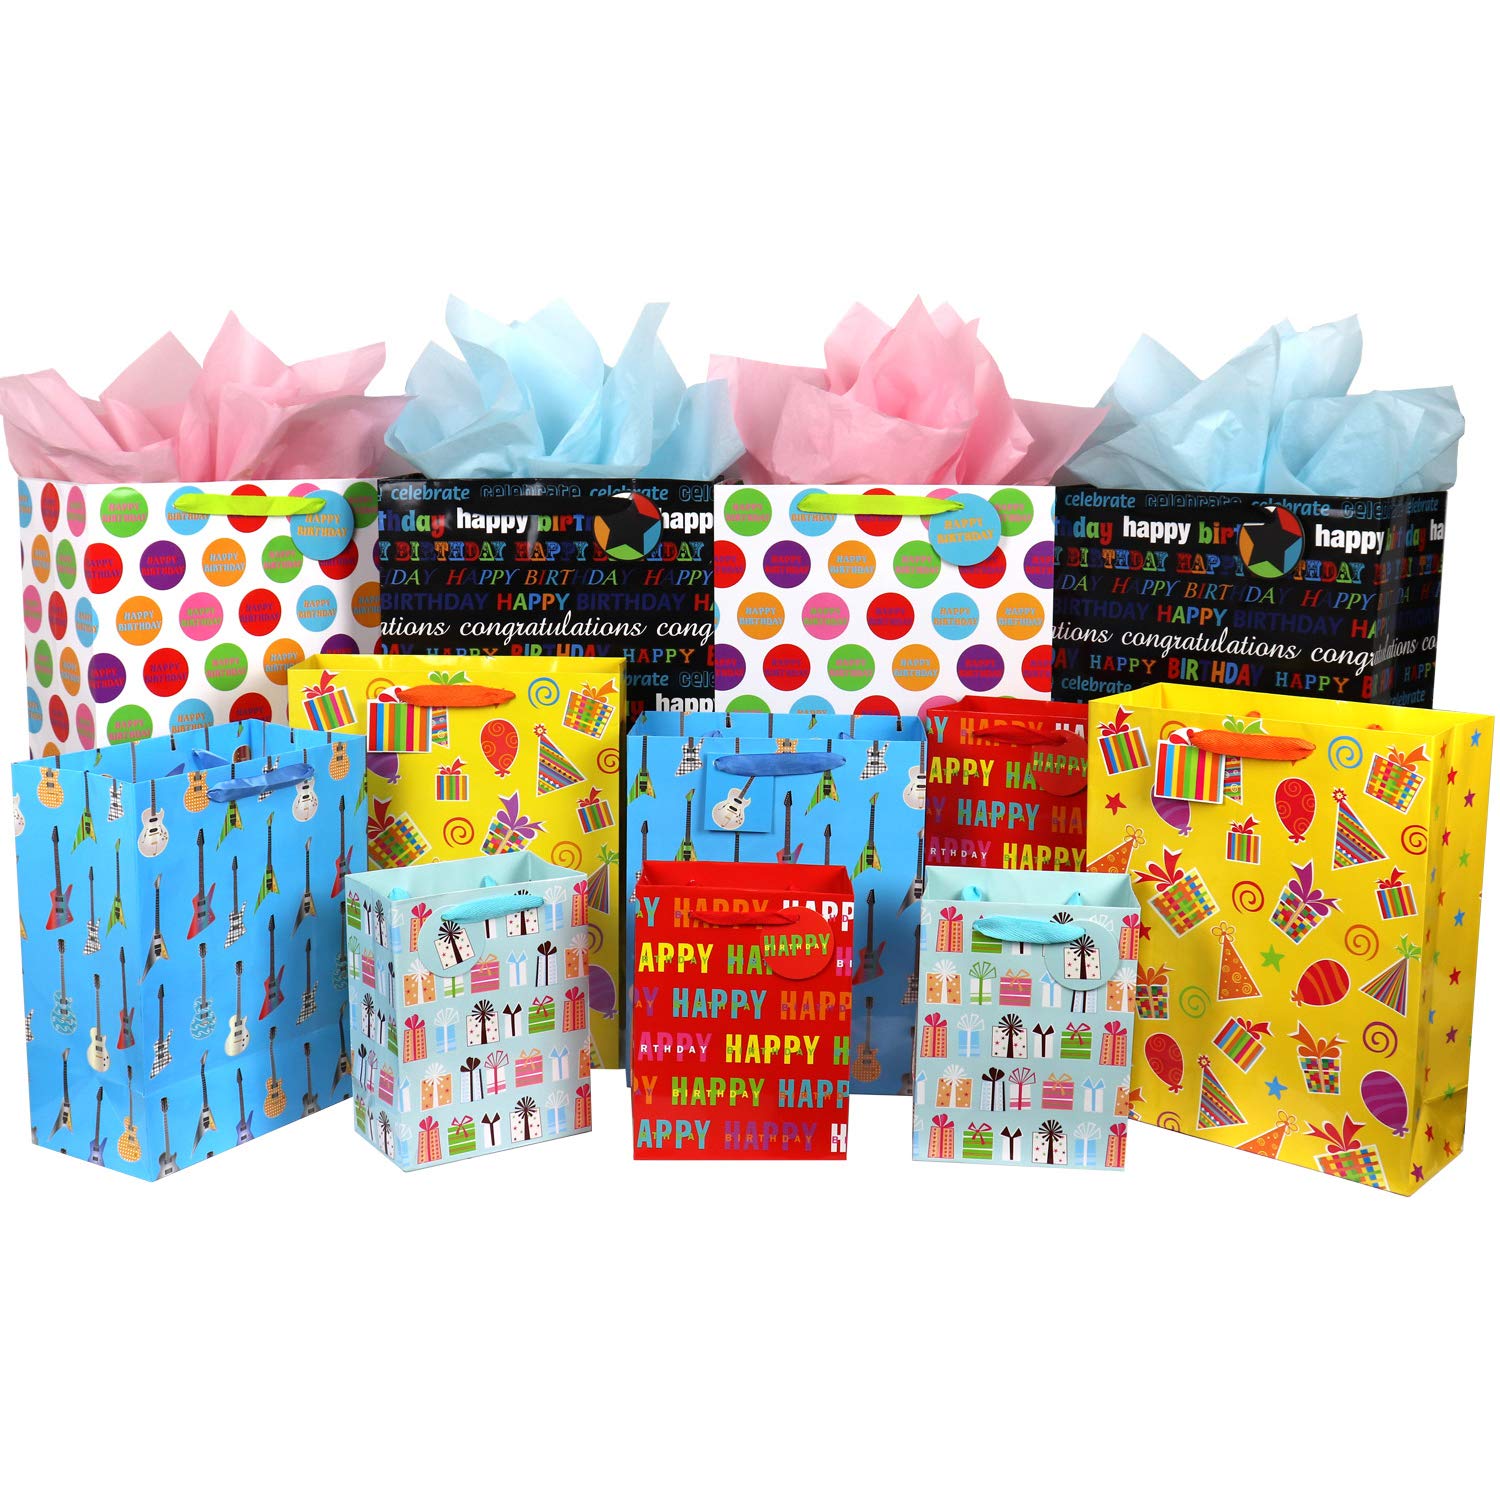 12 Pcs Birthday Gift Bags| Large| Medium and Small Gift Bags Assortment for Boys| Girls| Women| Men (Assorted Sizes)